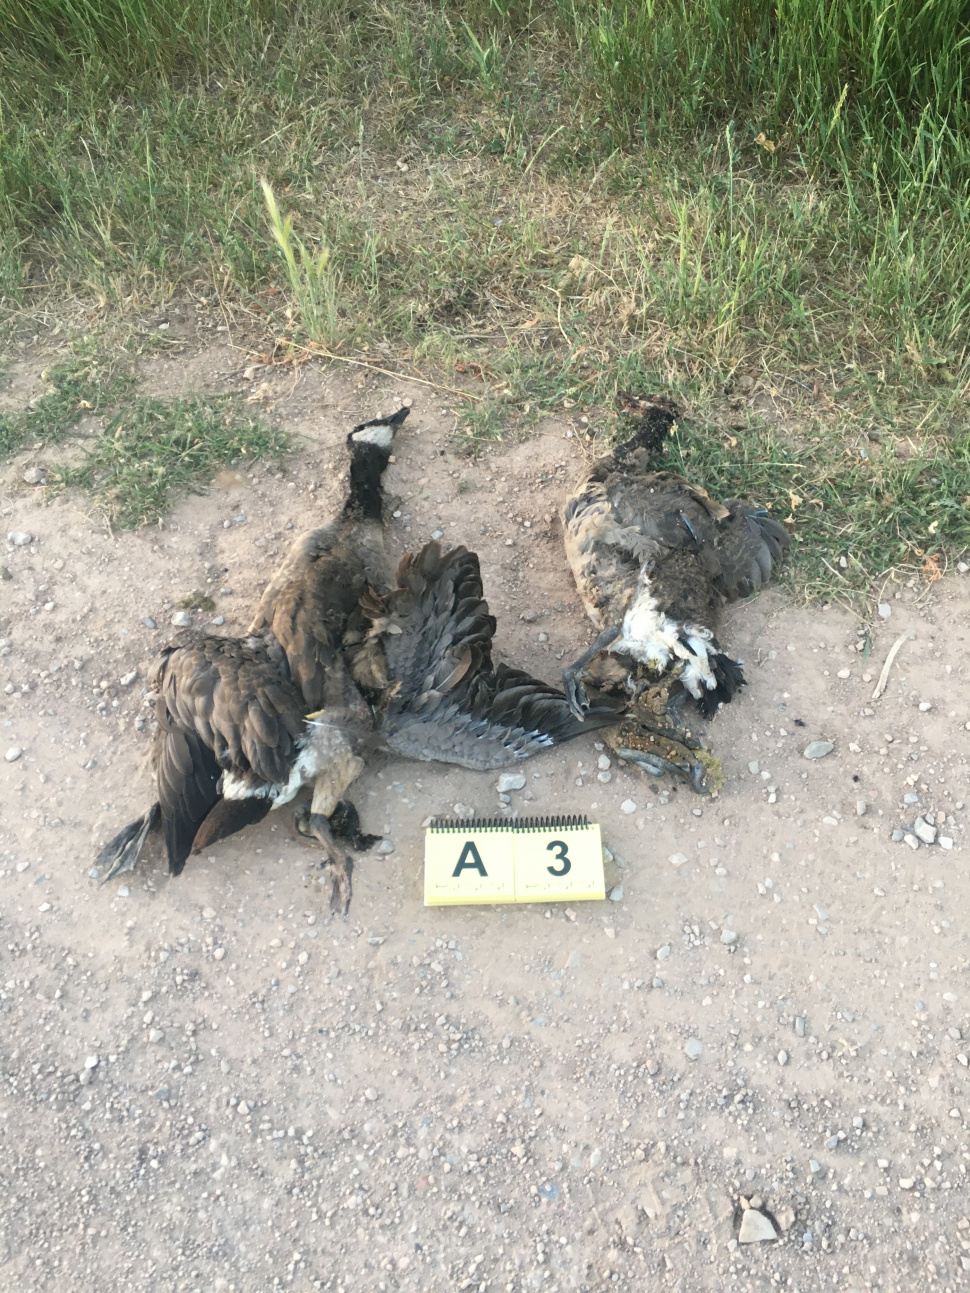 Idaho Fish and Game investigates the killing and decapitating of geese and goslings near Bloomington in southeast Idaho.